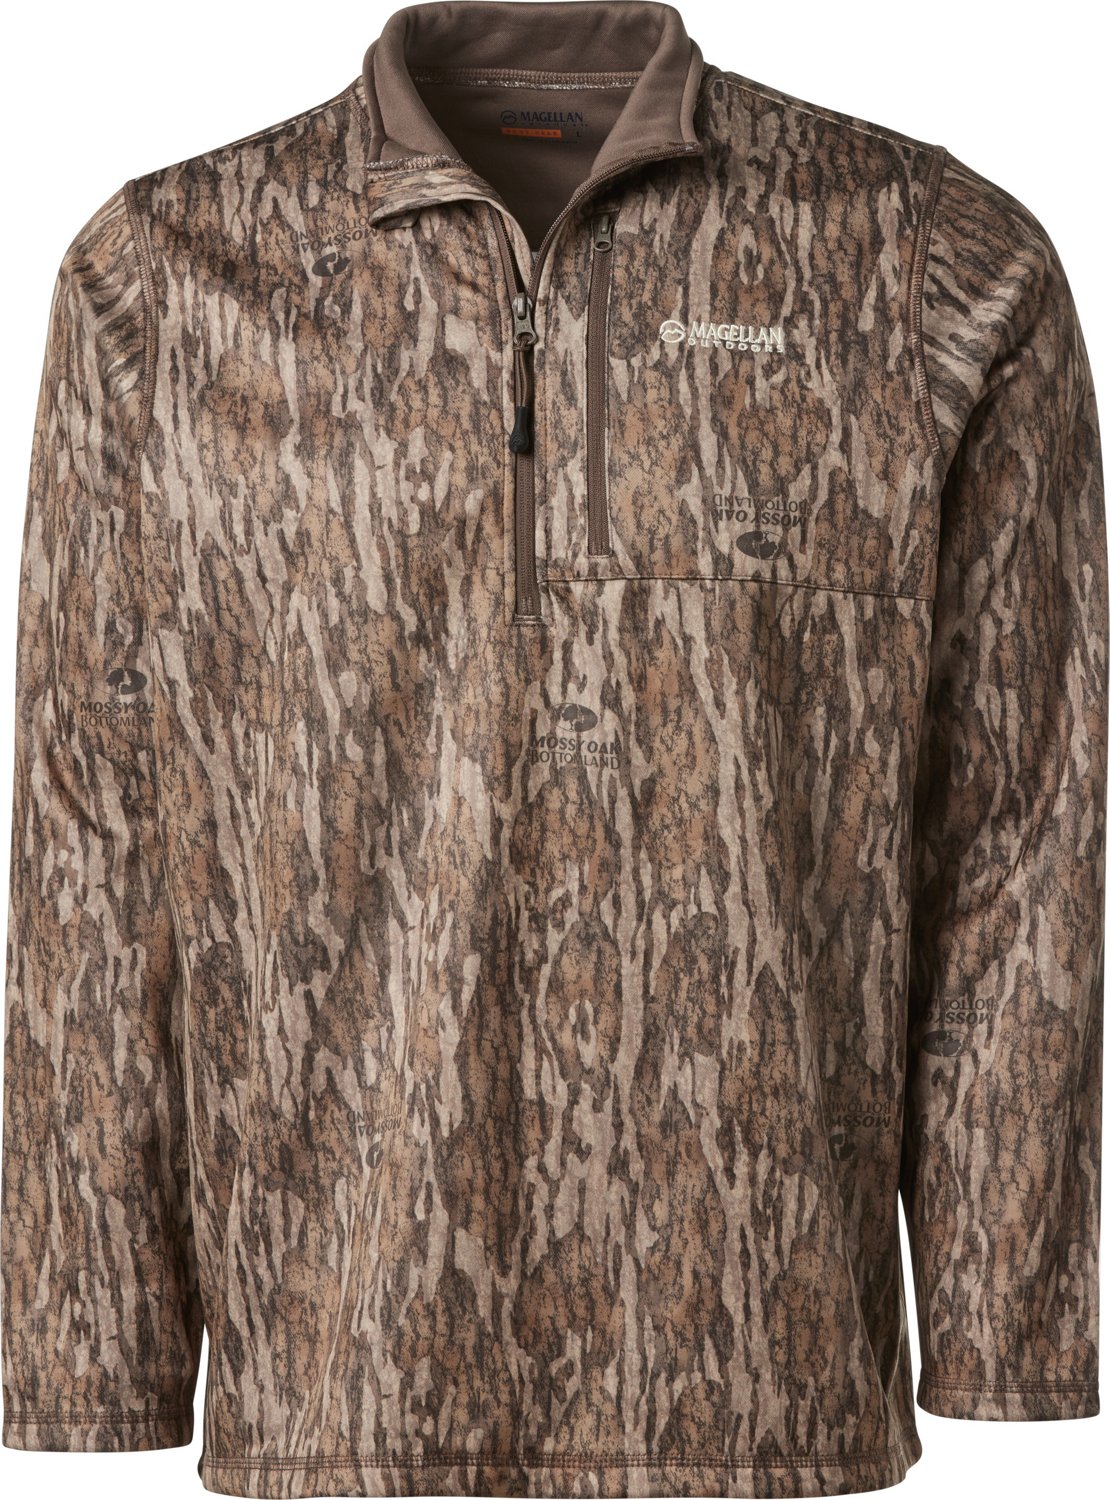 Duck Camo & Hunting Clothes